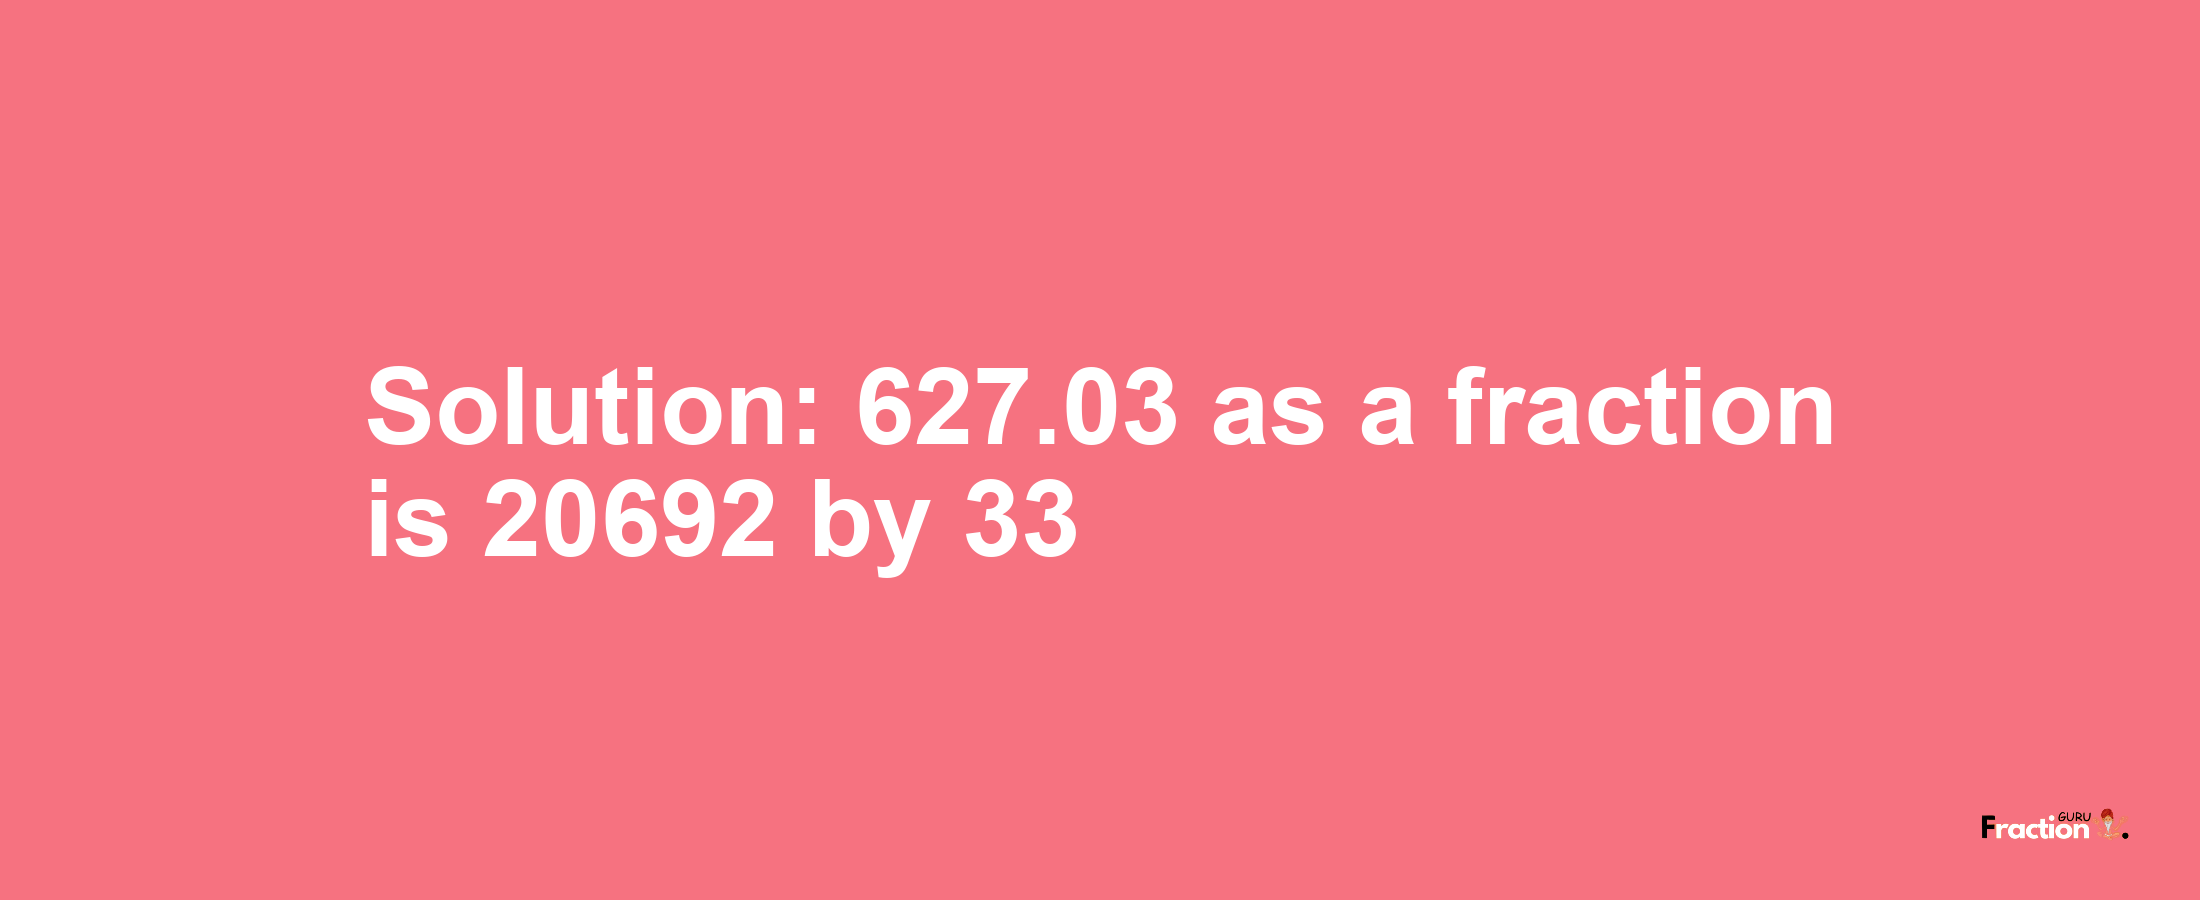 Solution:627.03 as a fraction is 20692/33